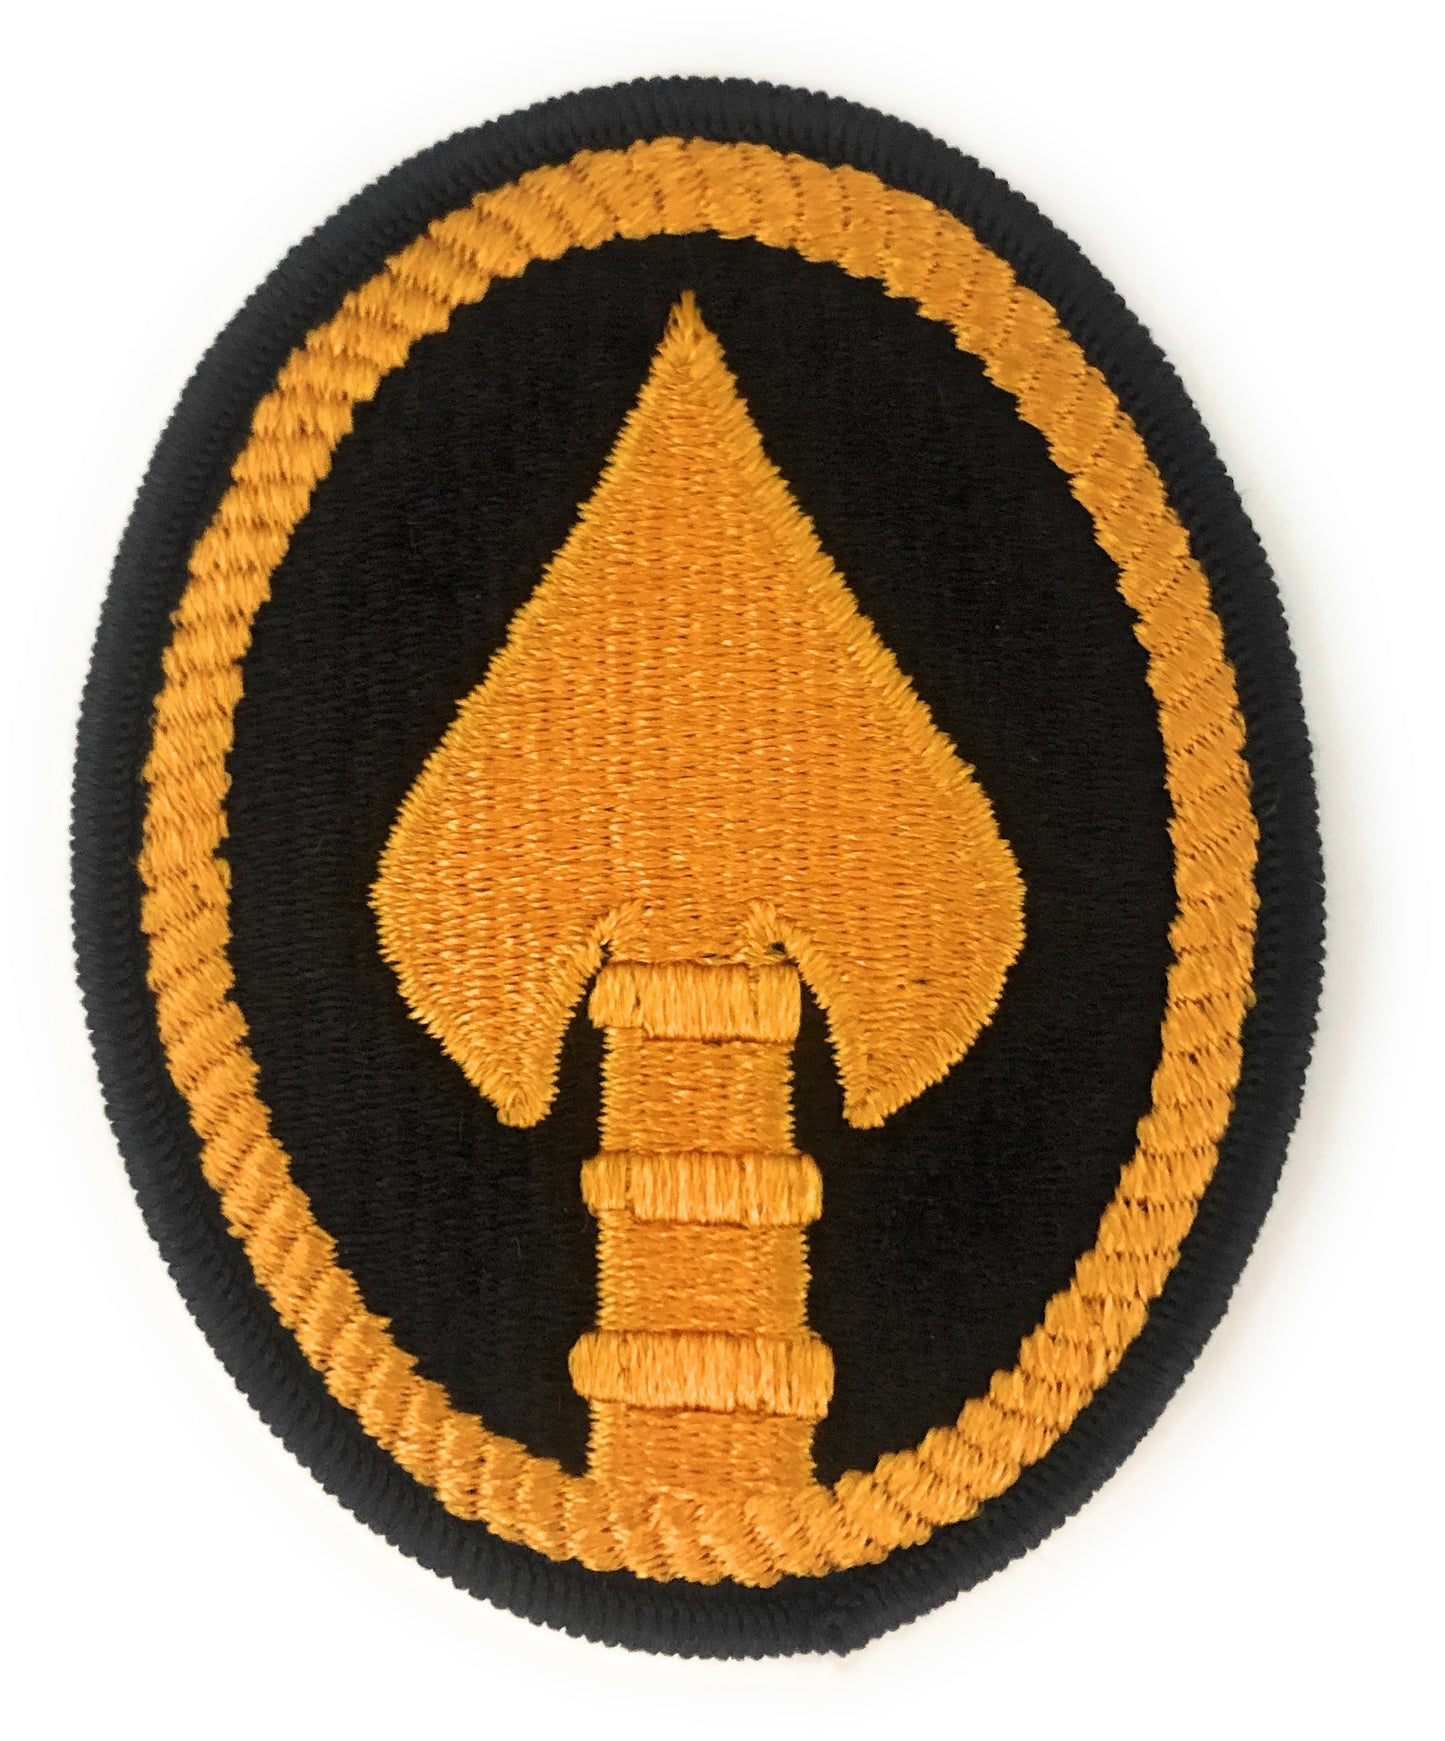 Special Ops Command (US ARMY ELEMENT) SEW ON AGSU Color Patch (each)